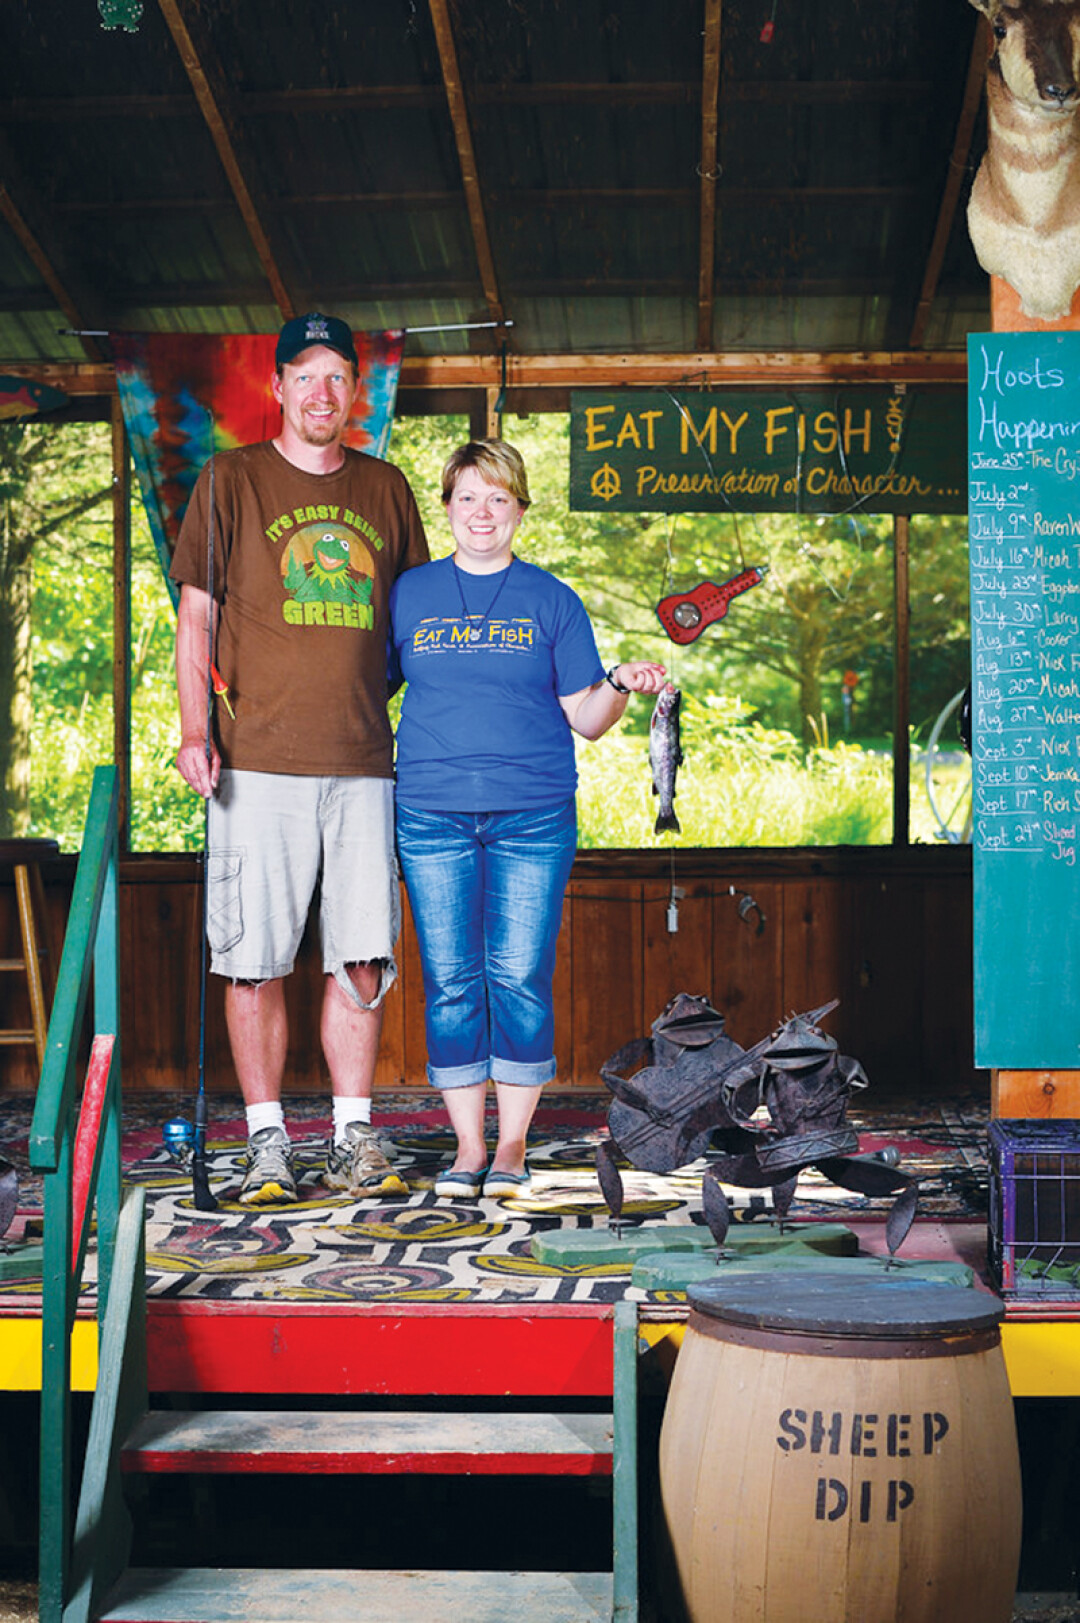 Jeremiah’s Bullfrog Fish Farm co-owners Jeremiah and Jordan Fredrickson will carry on the Bullfrog legacy from former owner and founder Herby Radmann.